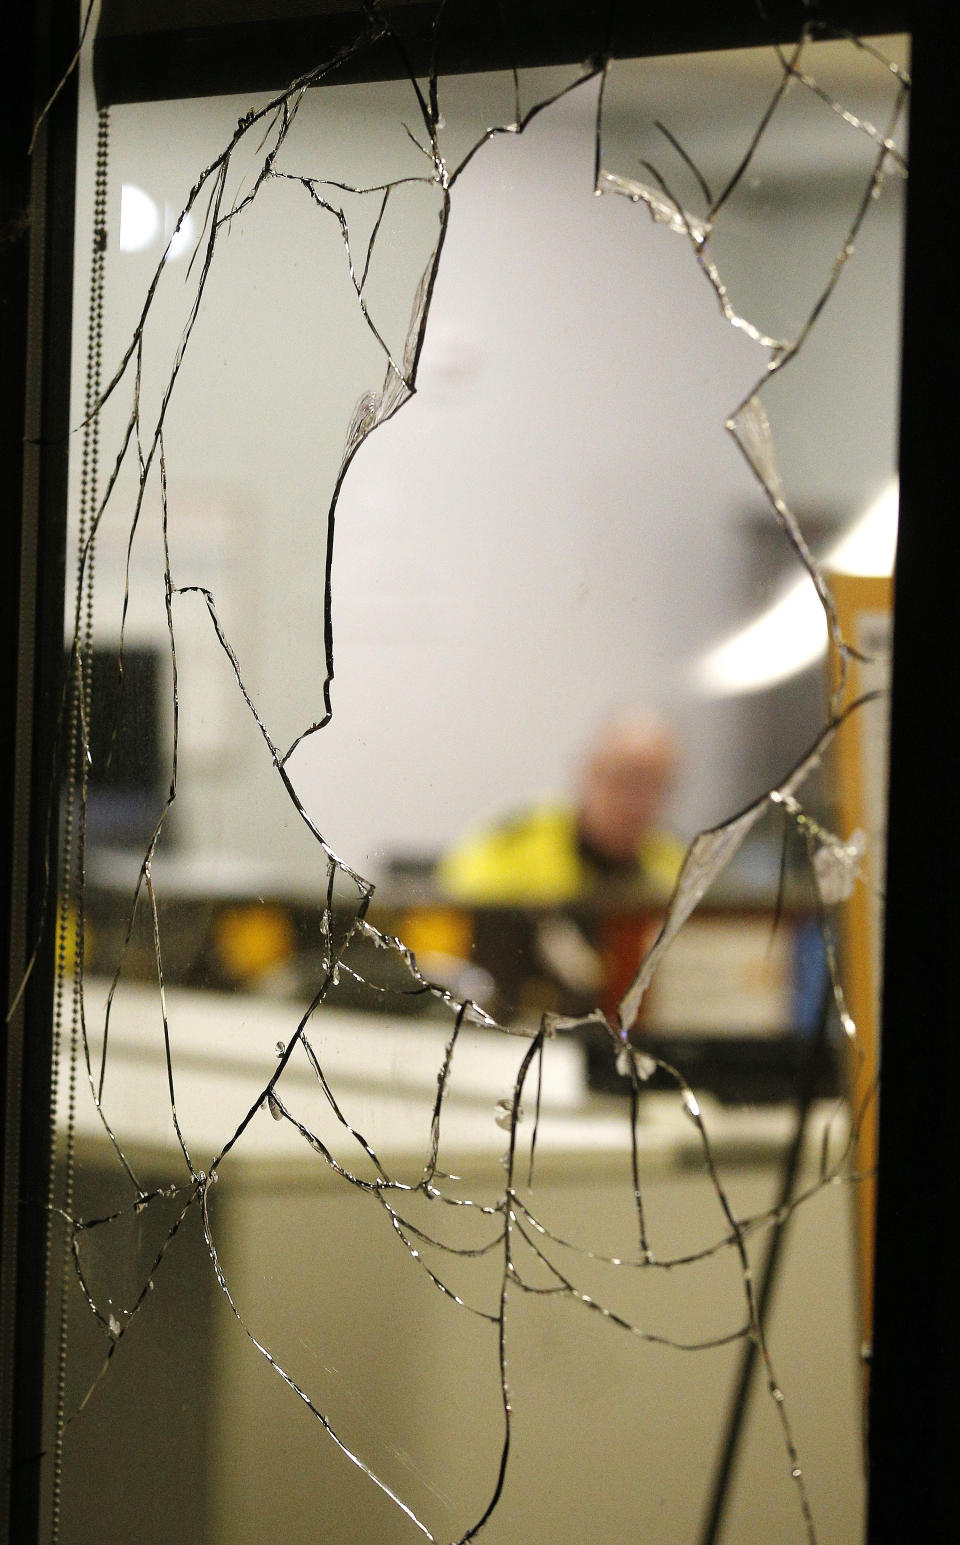 A window of the the VCU Grace and Broad Resident Center is left shattered as protesters marched through the area and squared off with police in Richmond, Va., Saturday, July 25, 2020. (James H Wallace/Richmond Times-Dispatch via AP)